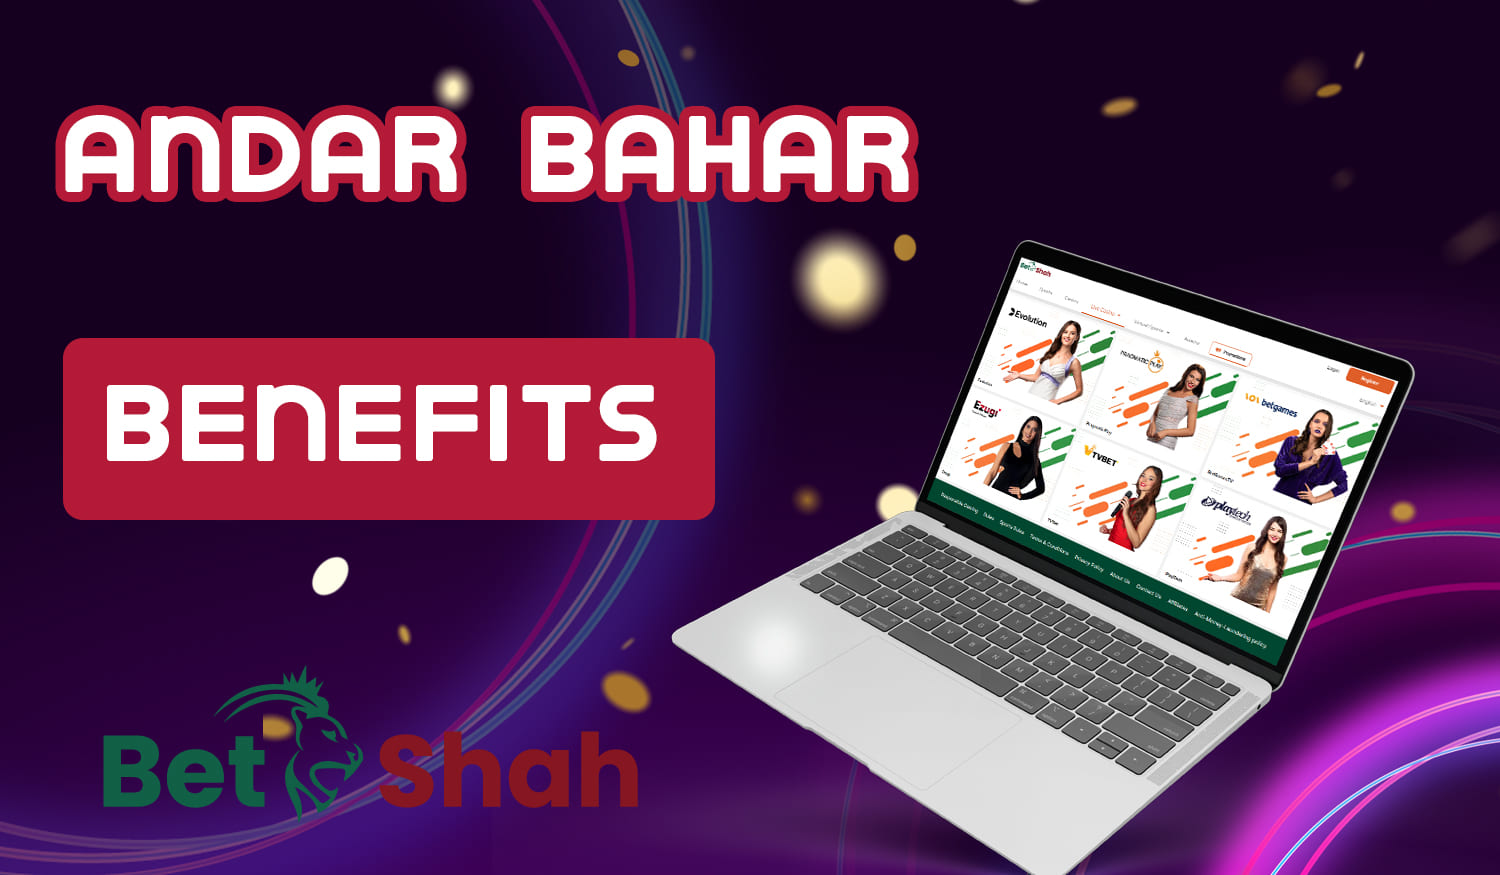 Benefits of BetShah online casino for fans of the Andar Bahar game